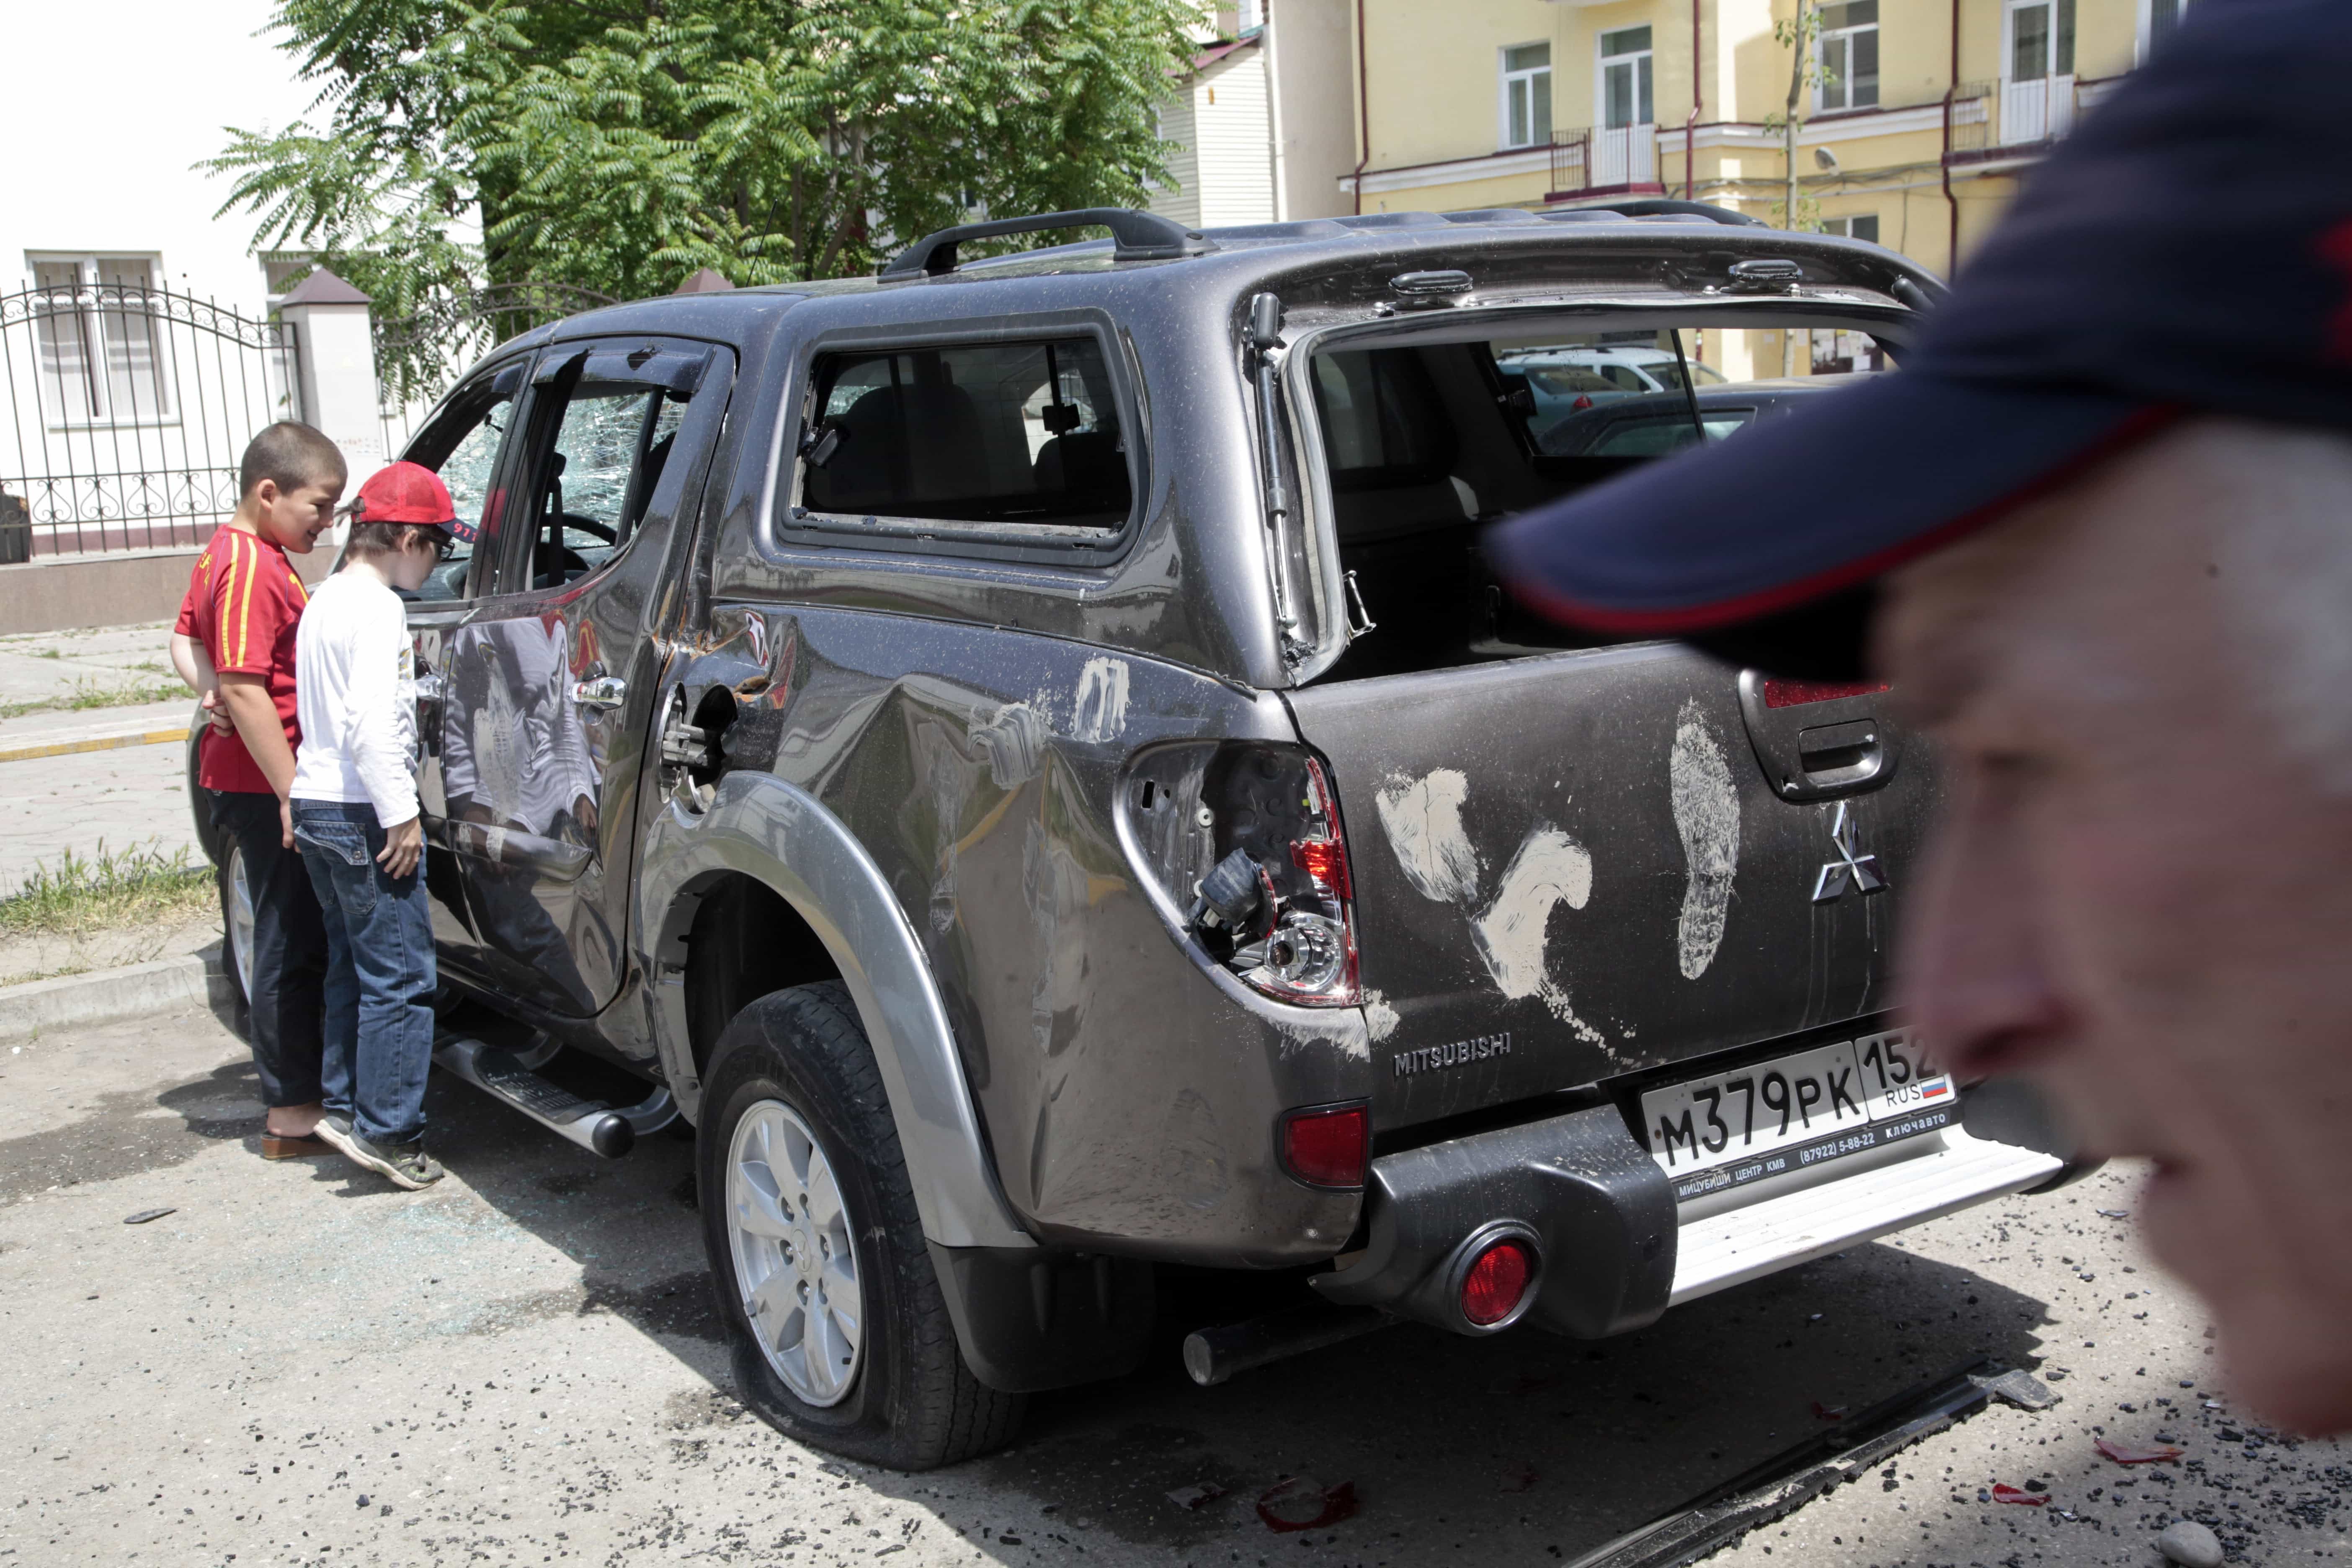 Children look into a damaged car, outside the office of the Committee Against Torture in Grozny, Russia, 3 June 2015. Masked men bashed their way into the office of the Committee against Torture in the regional Chechen capital of Grozny last year, smashing furniture and sending the occupants fleeing through the windows, their colleagues said. , AP Photo/Musa Sadulayev, file